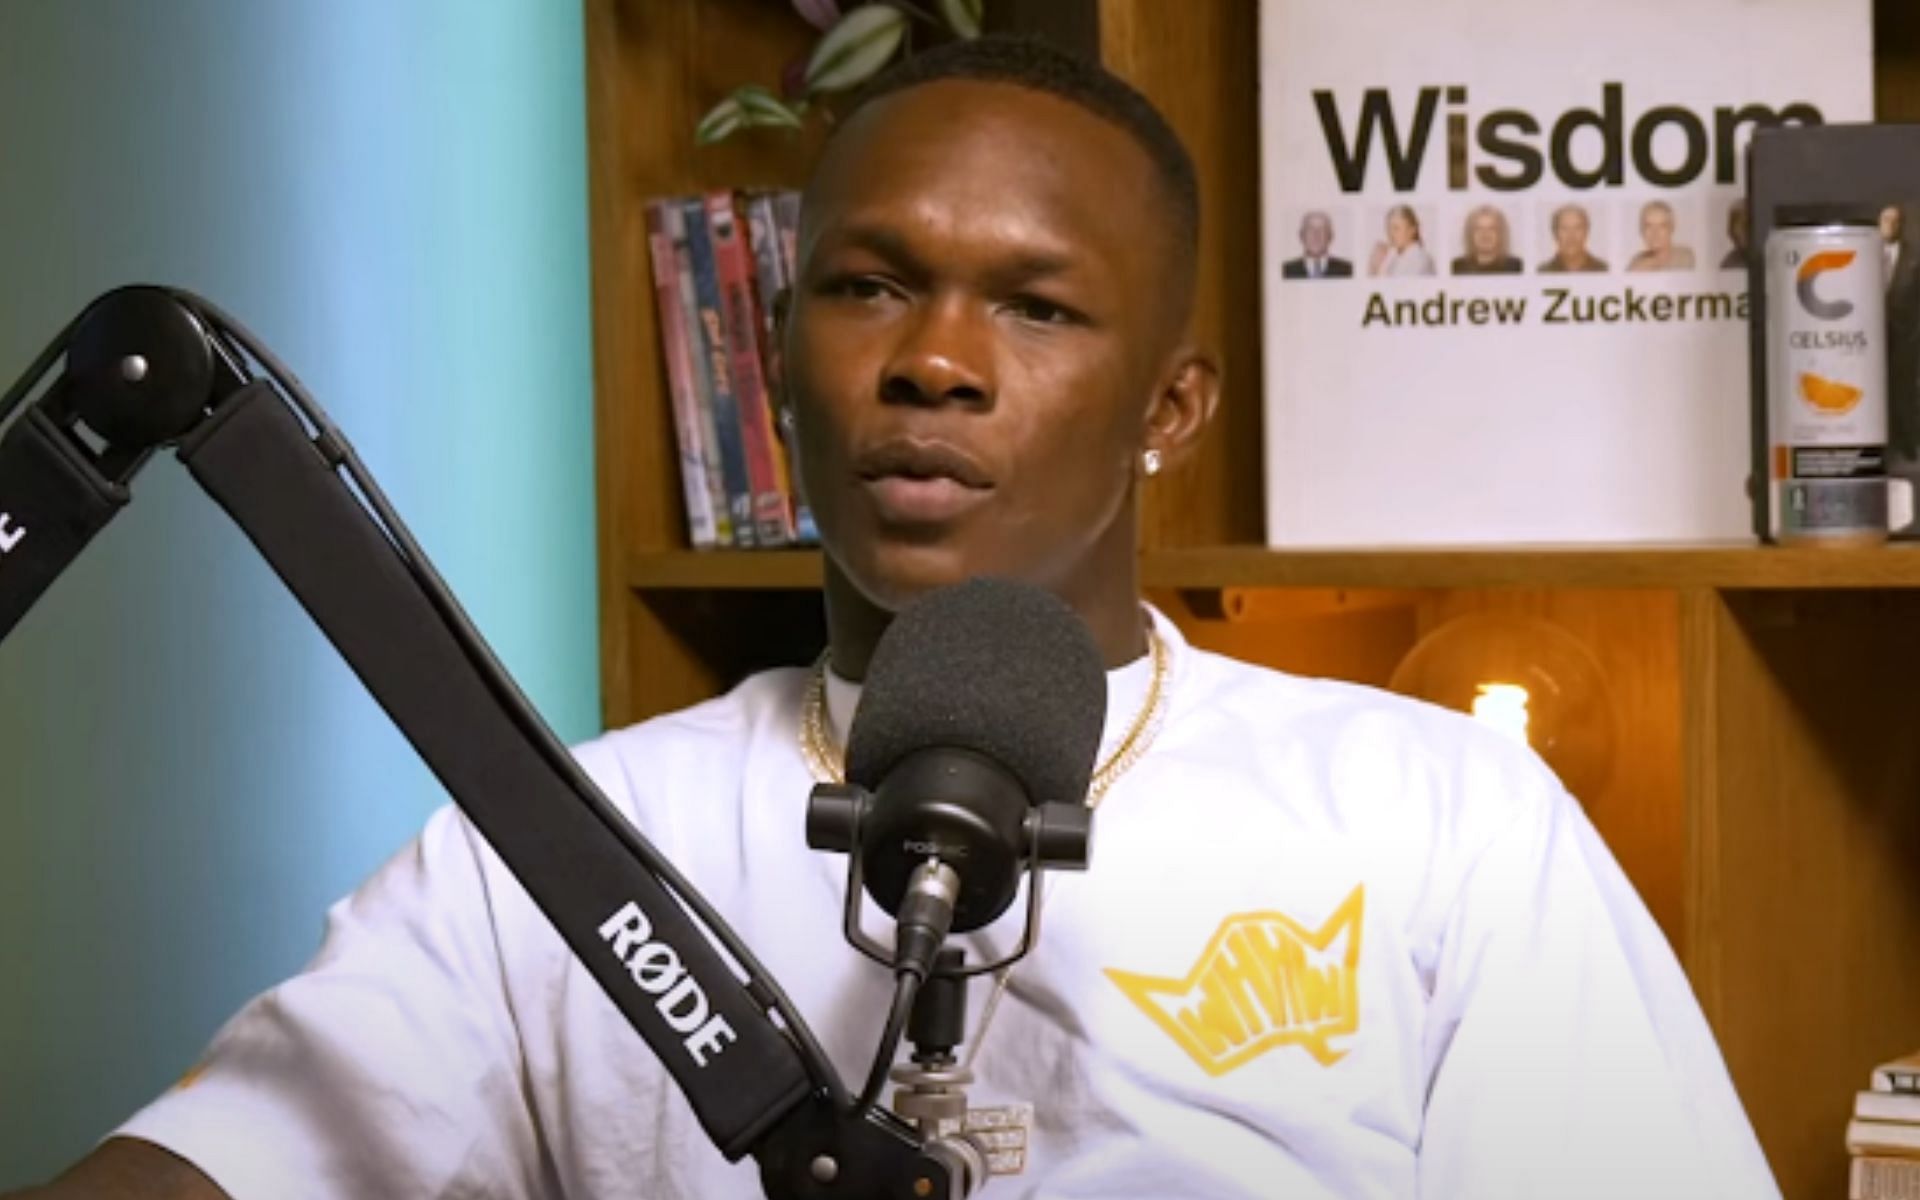 Israel Adesanya drops bombshell, says Dricus du Plessis refused top brass&rsquo; offer to fight him at UFC 300 [Image courtesy: Theo Von - YouTube]